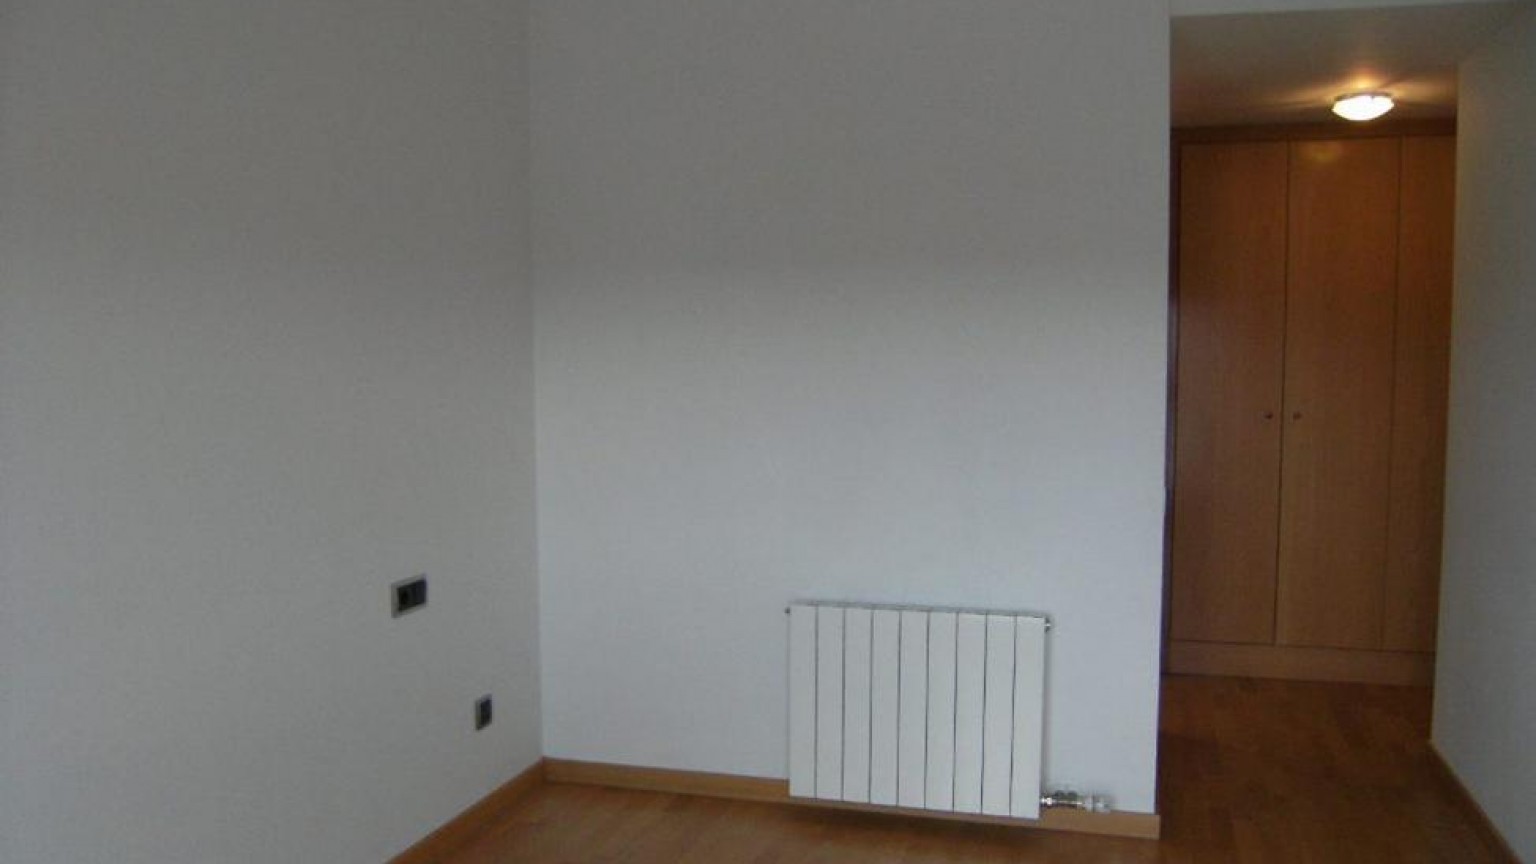 Flat for sale with parking and storage room, communal pool and garden, residential area.